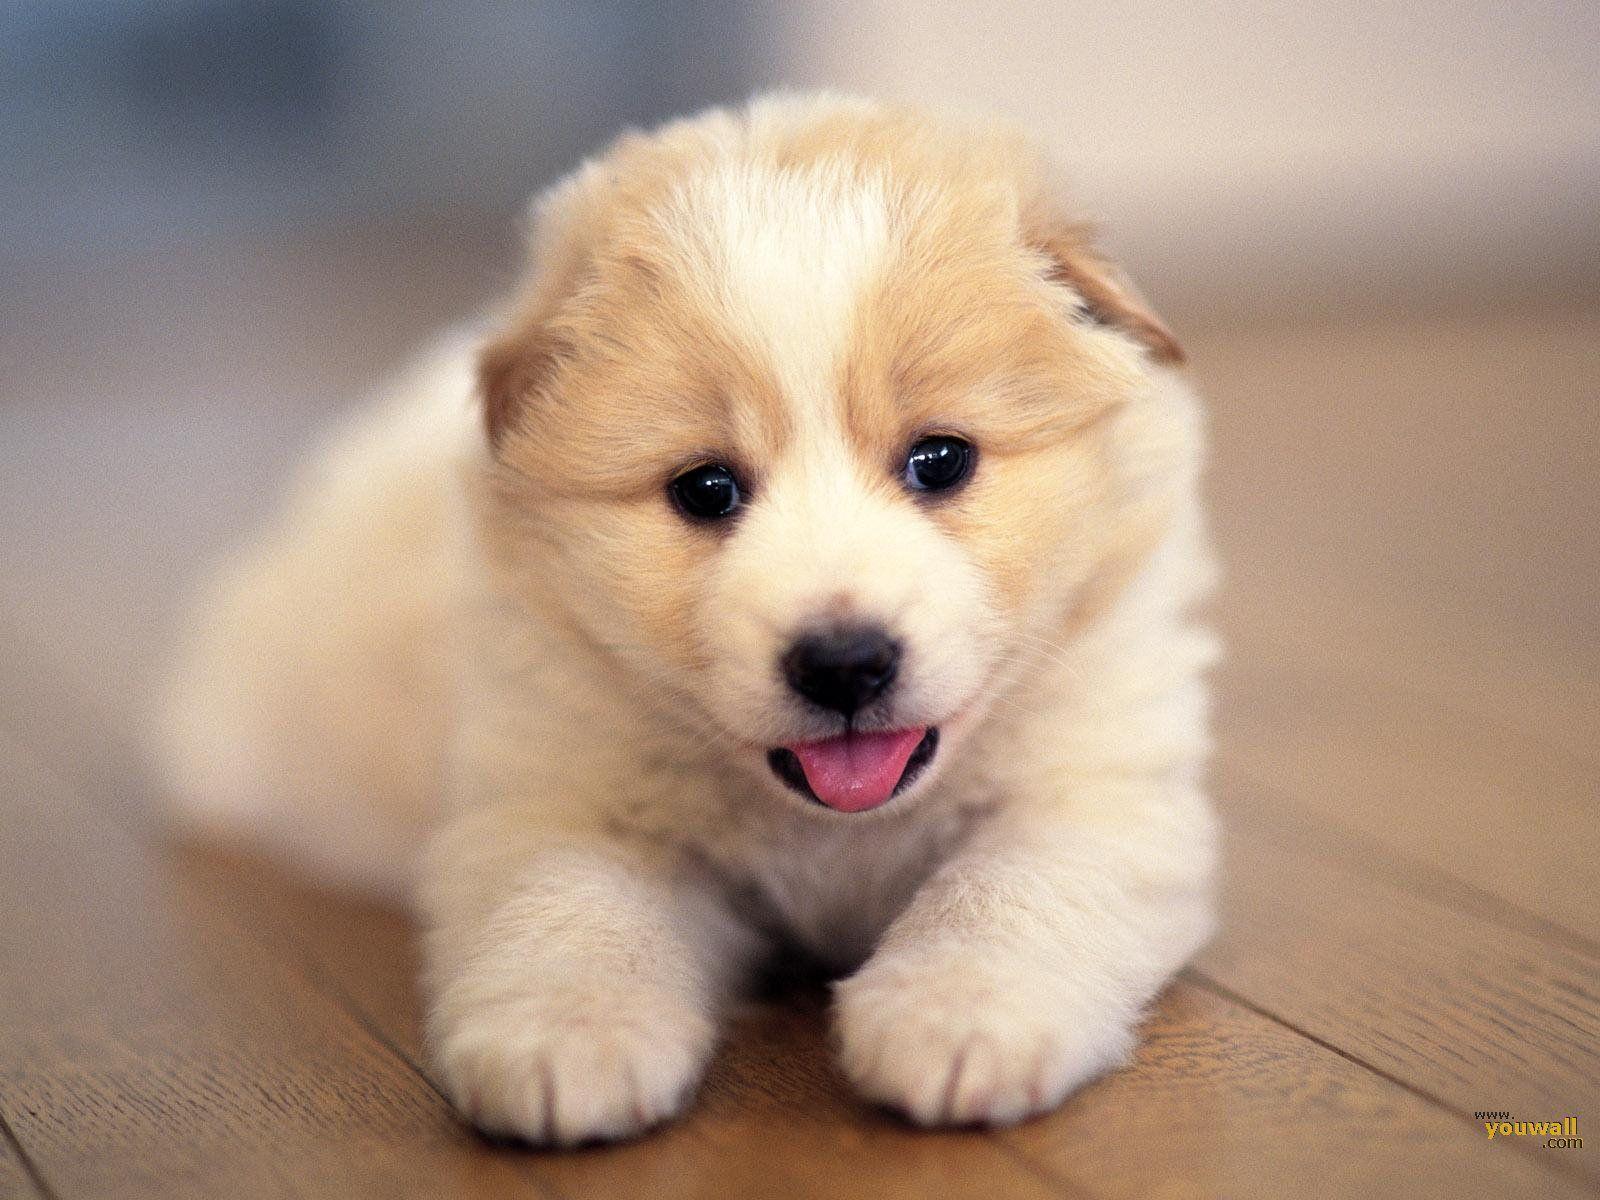 Cute Baby Dog Wallpaper Phone with High Resolution Wallpaper